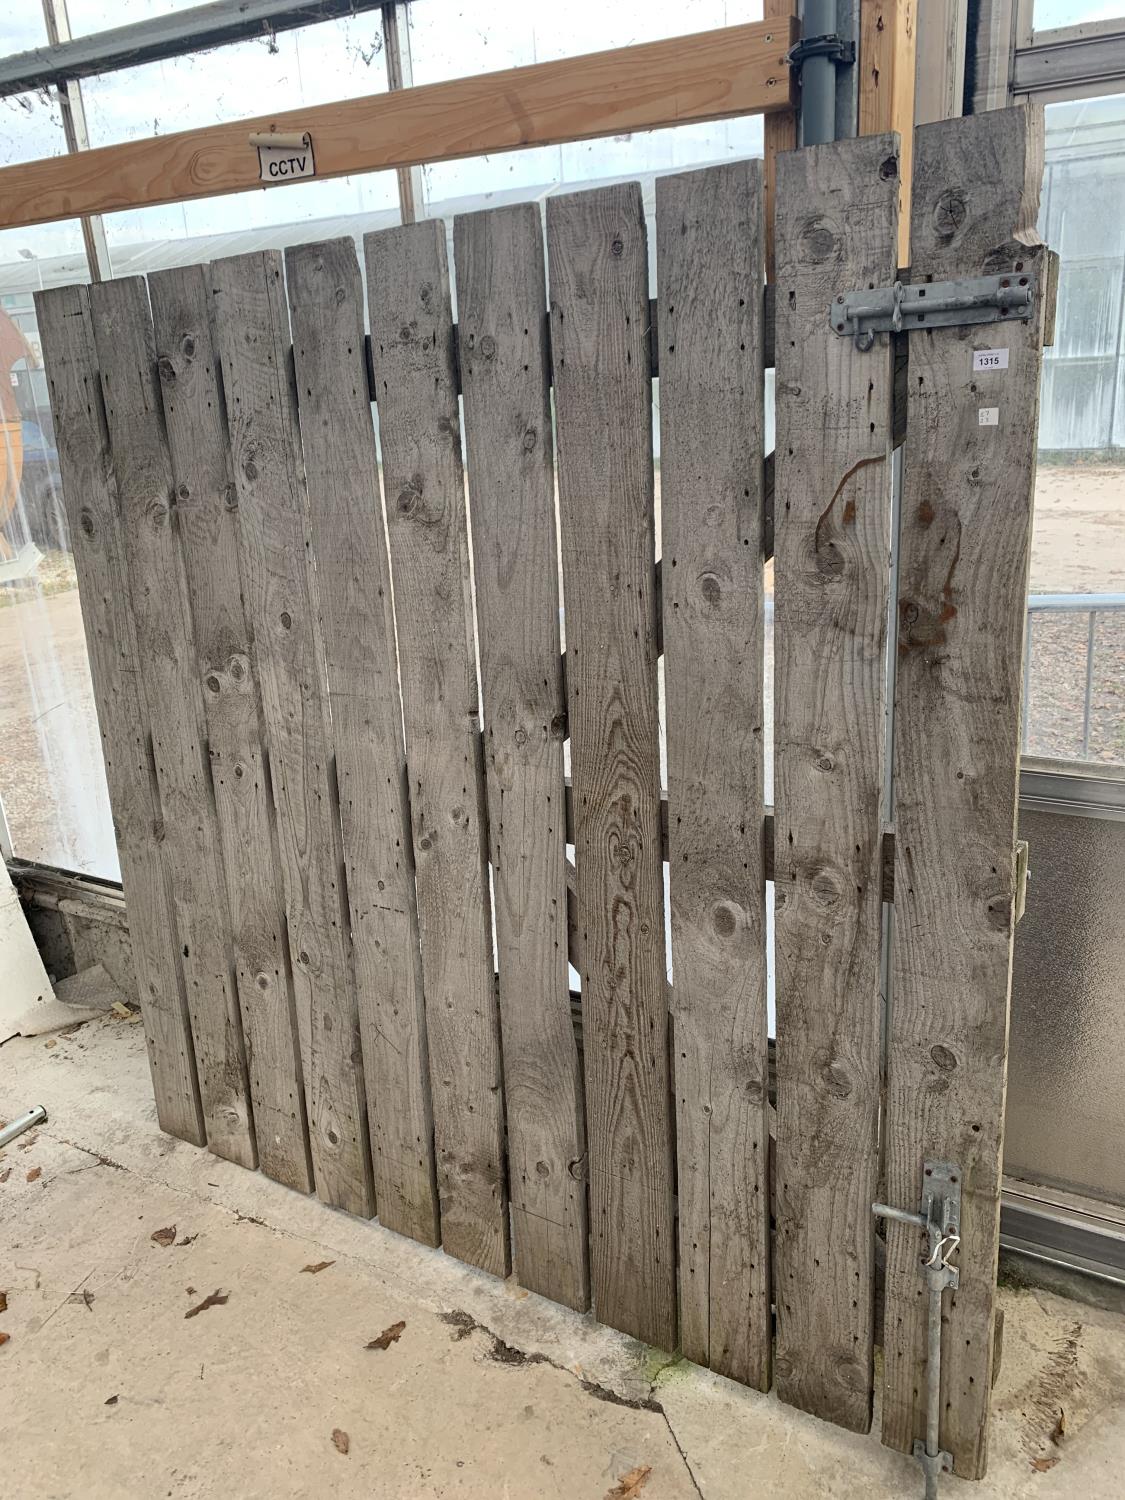 A VERY LARGE SLATTED WOODEN YARD GATE, WIDTH 182CM, HEIGHT 180CM